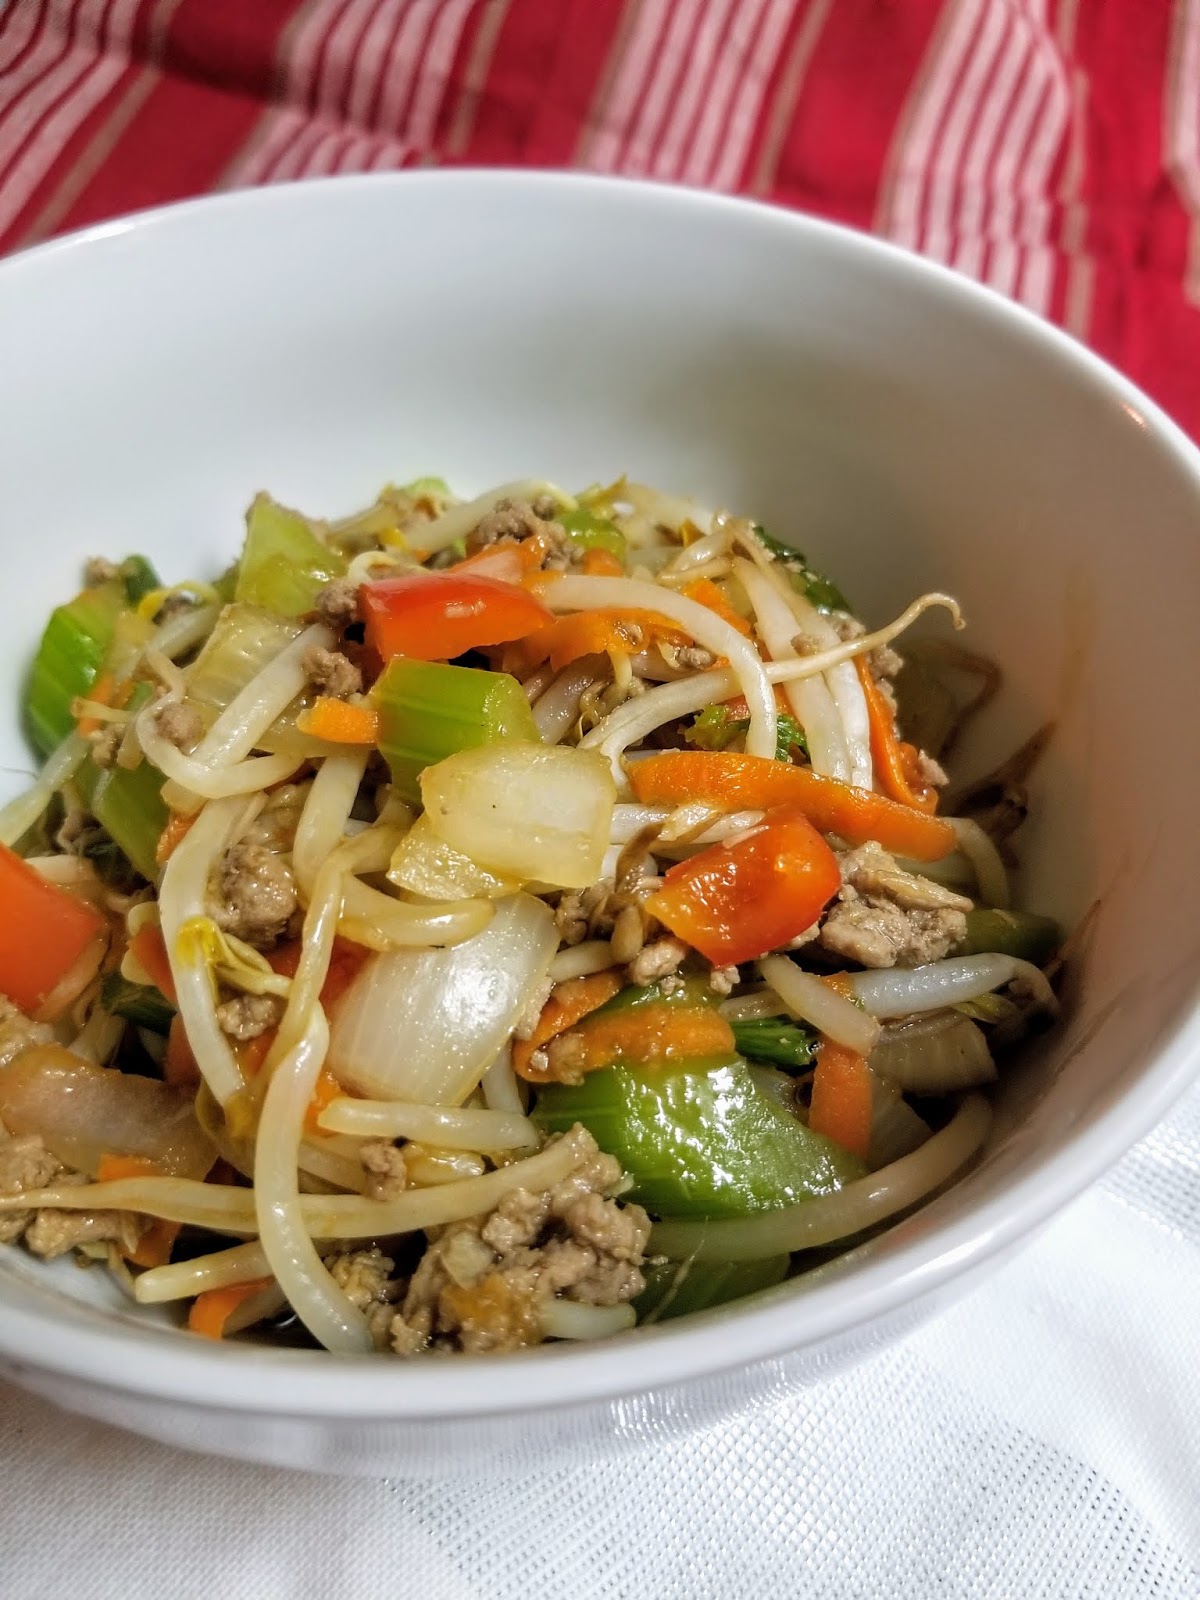 Hot and Cold Running Mom - Just my Stuff: Beef Chop Suey